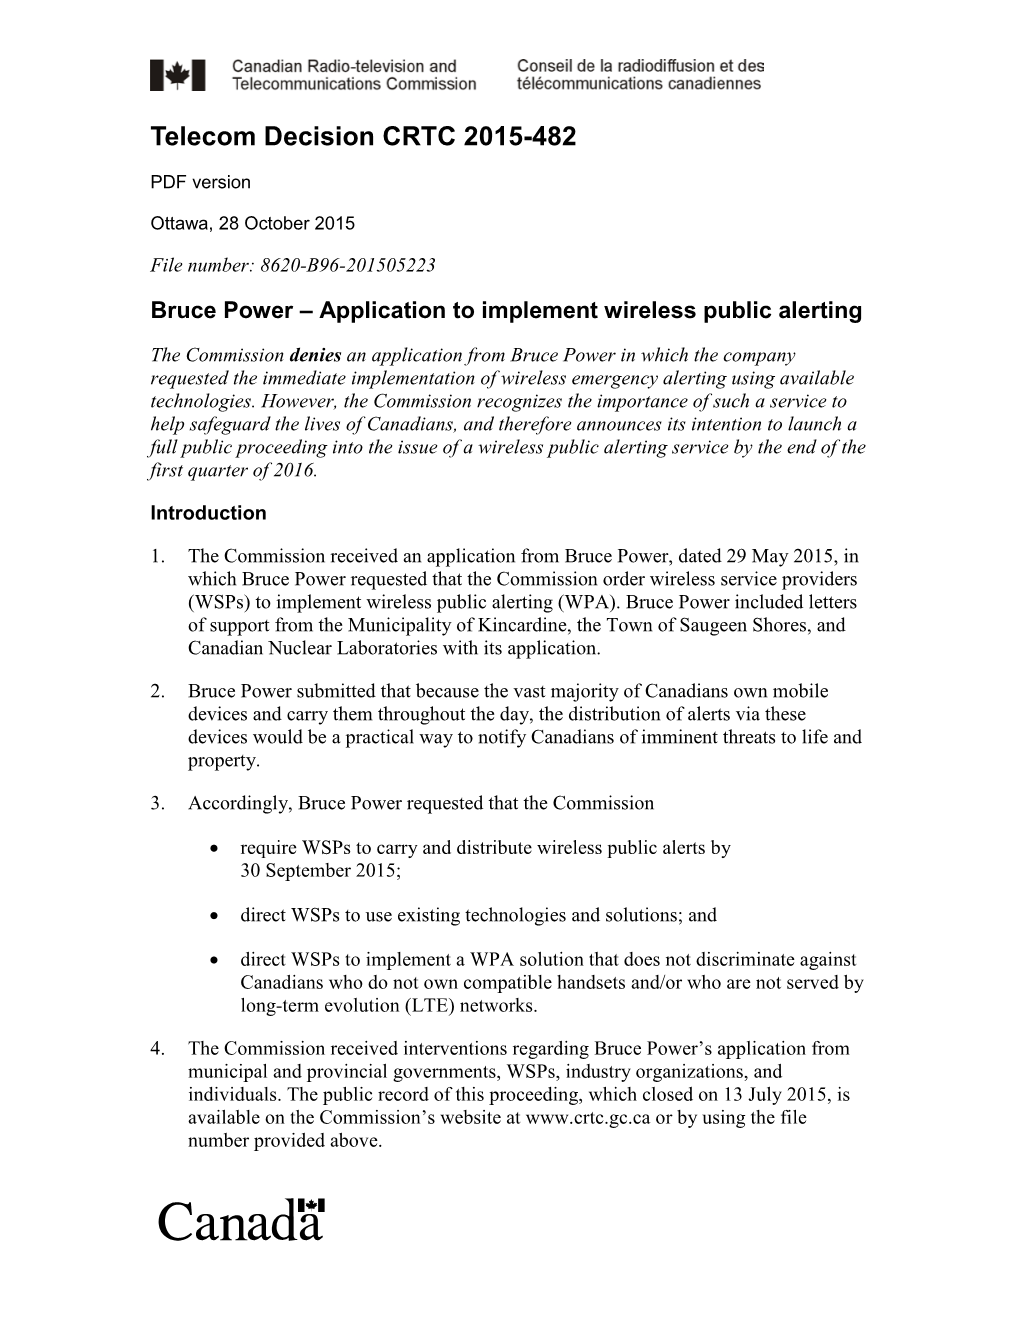 Bruce Power – Application to Implement Wireless Public Alerting